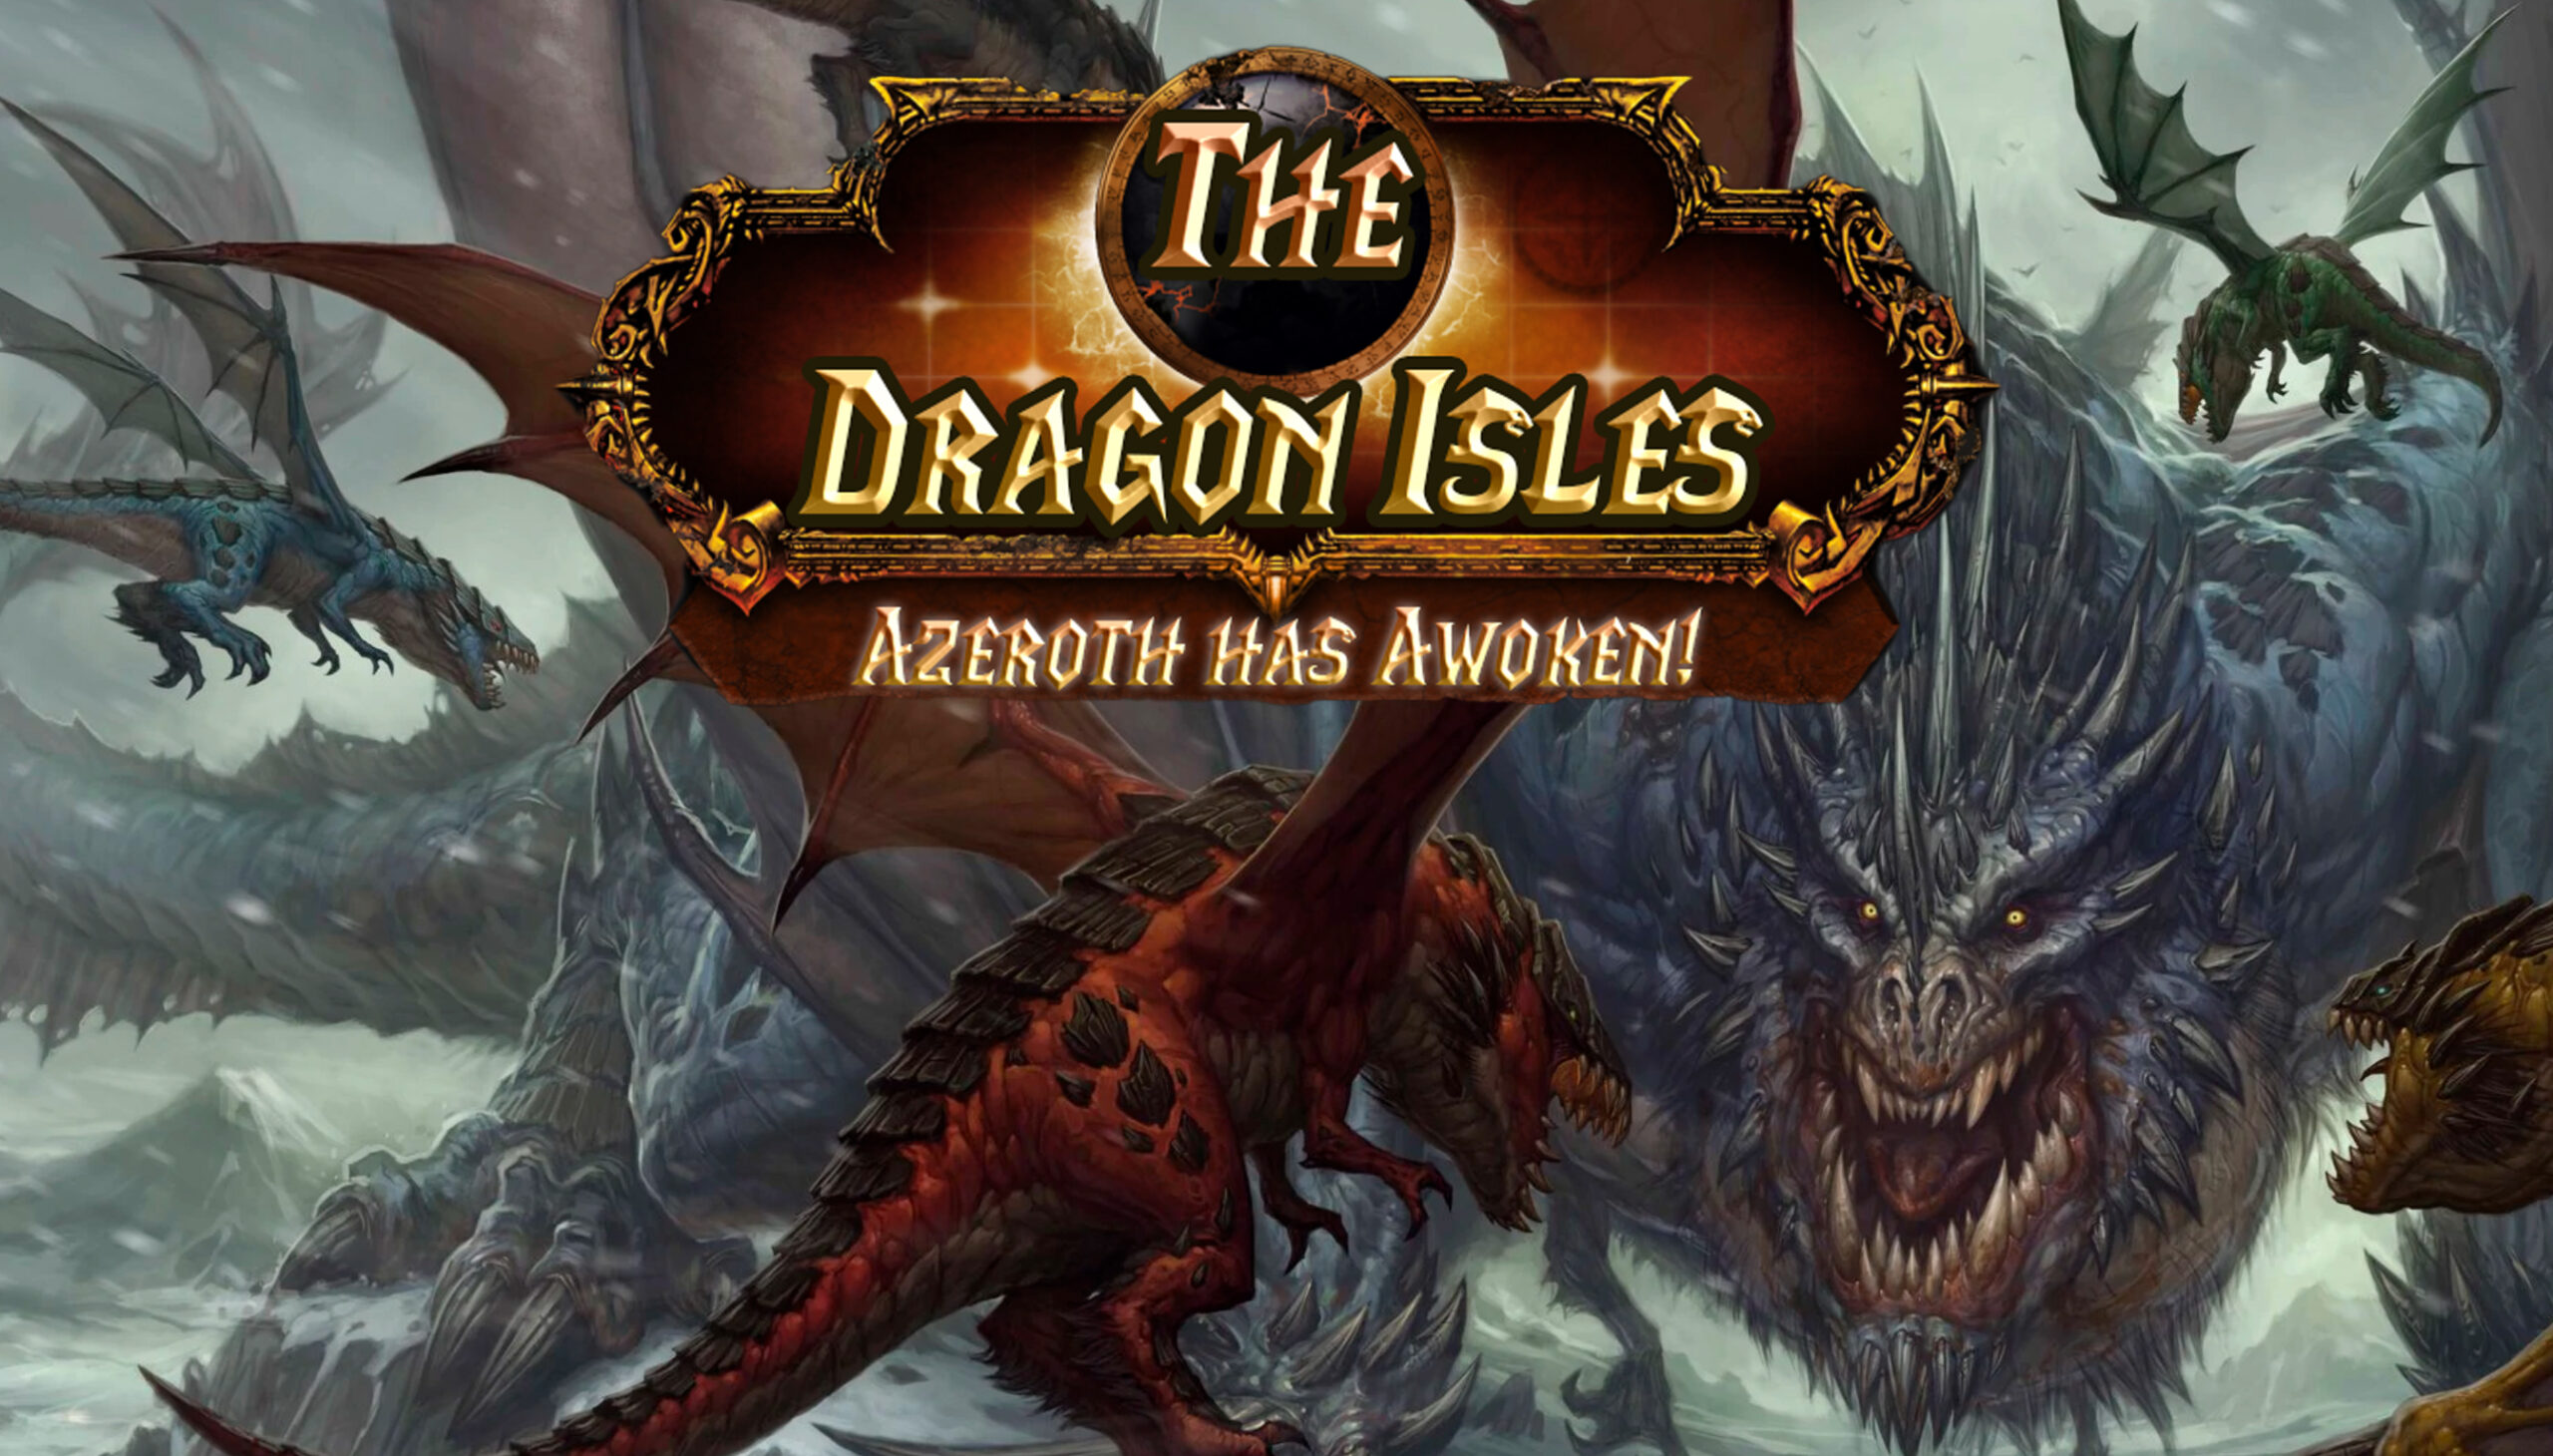 The Dragon Isles is the Next World of Warcraft Expansion According to Alleged Leak [Updated]